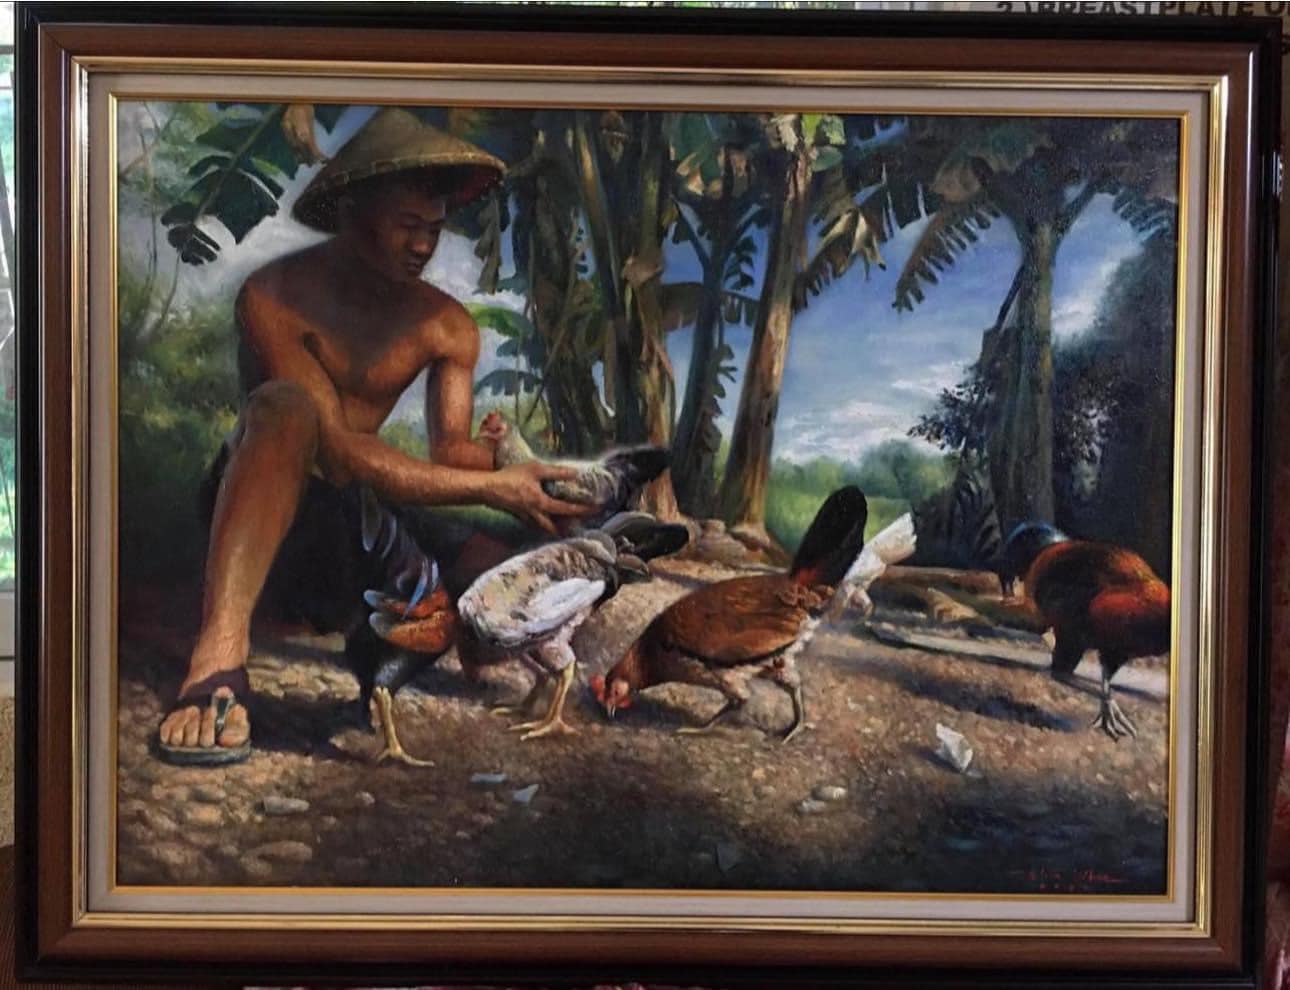 A Bukid Life painting of Elvin Vitor. Photo by Elvin Vitor.